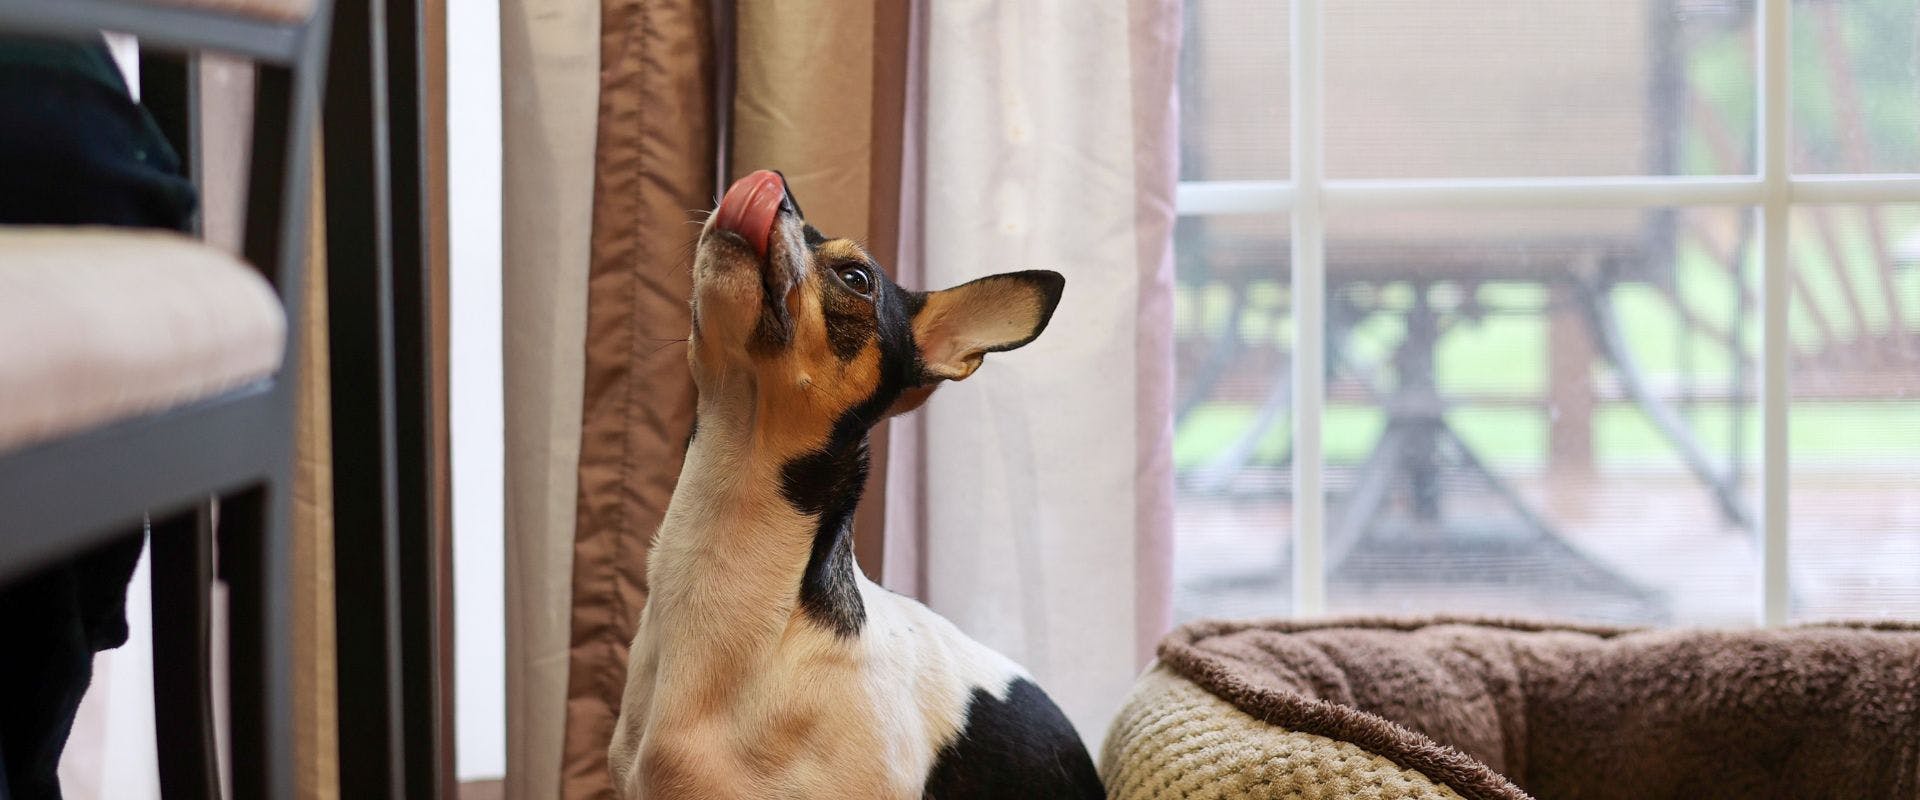 Chihuahua dog licking their lips and looking upwards